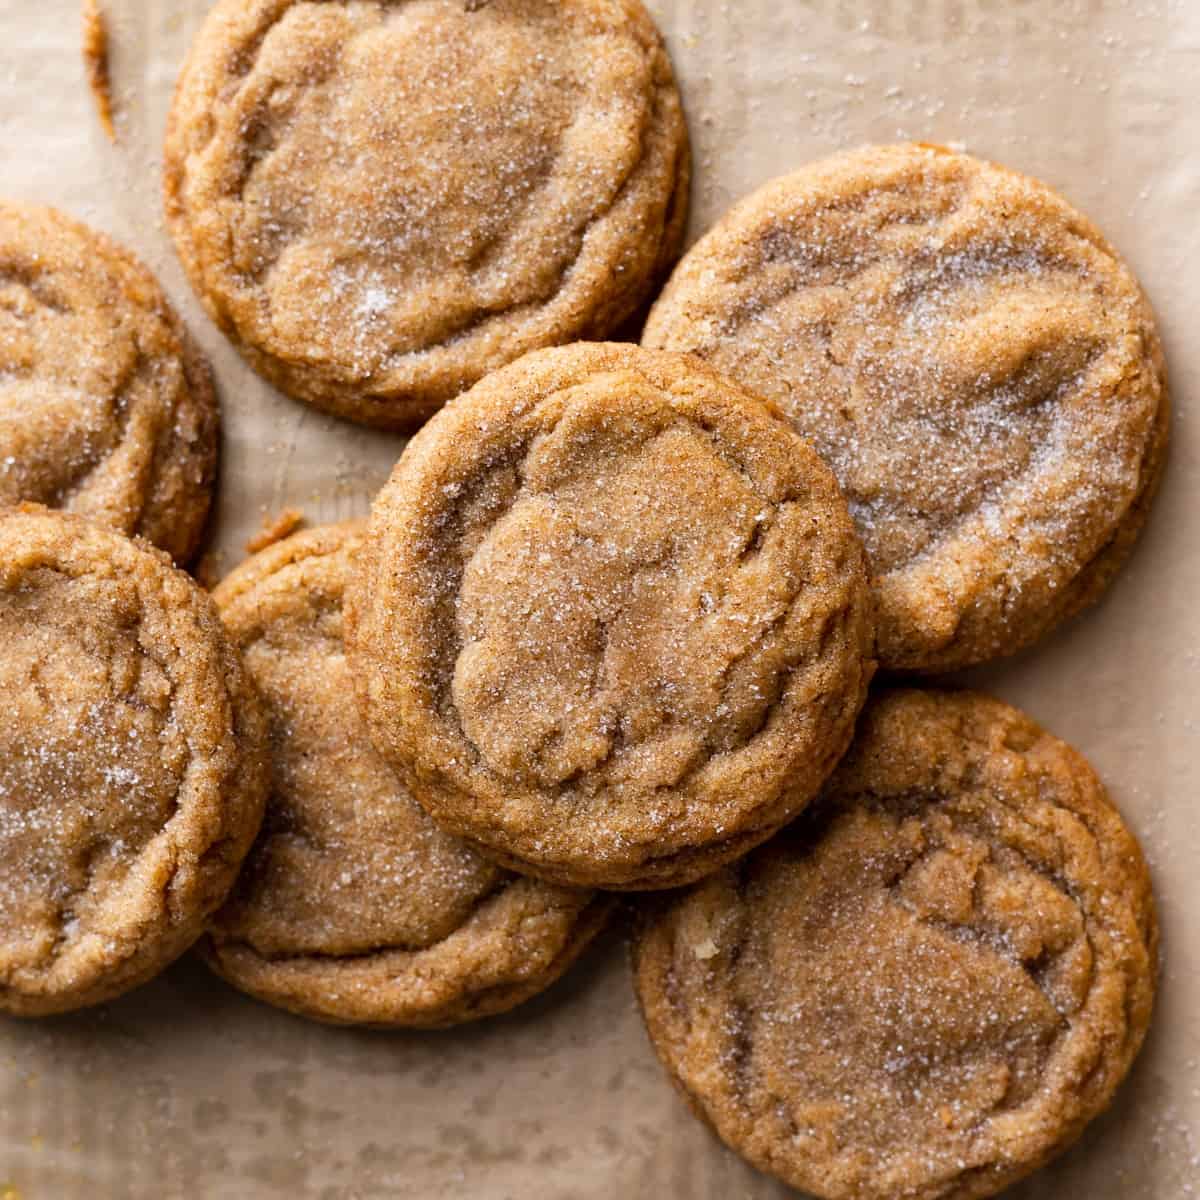 https://cambreabakes.com/wp-content/uploads/2022/12/chewy-pumpkin-cookies-featured.jpg